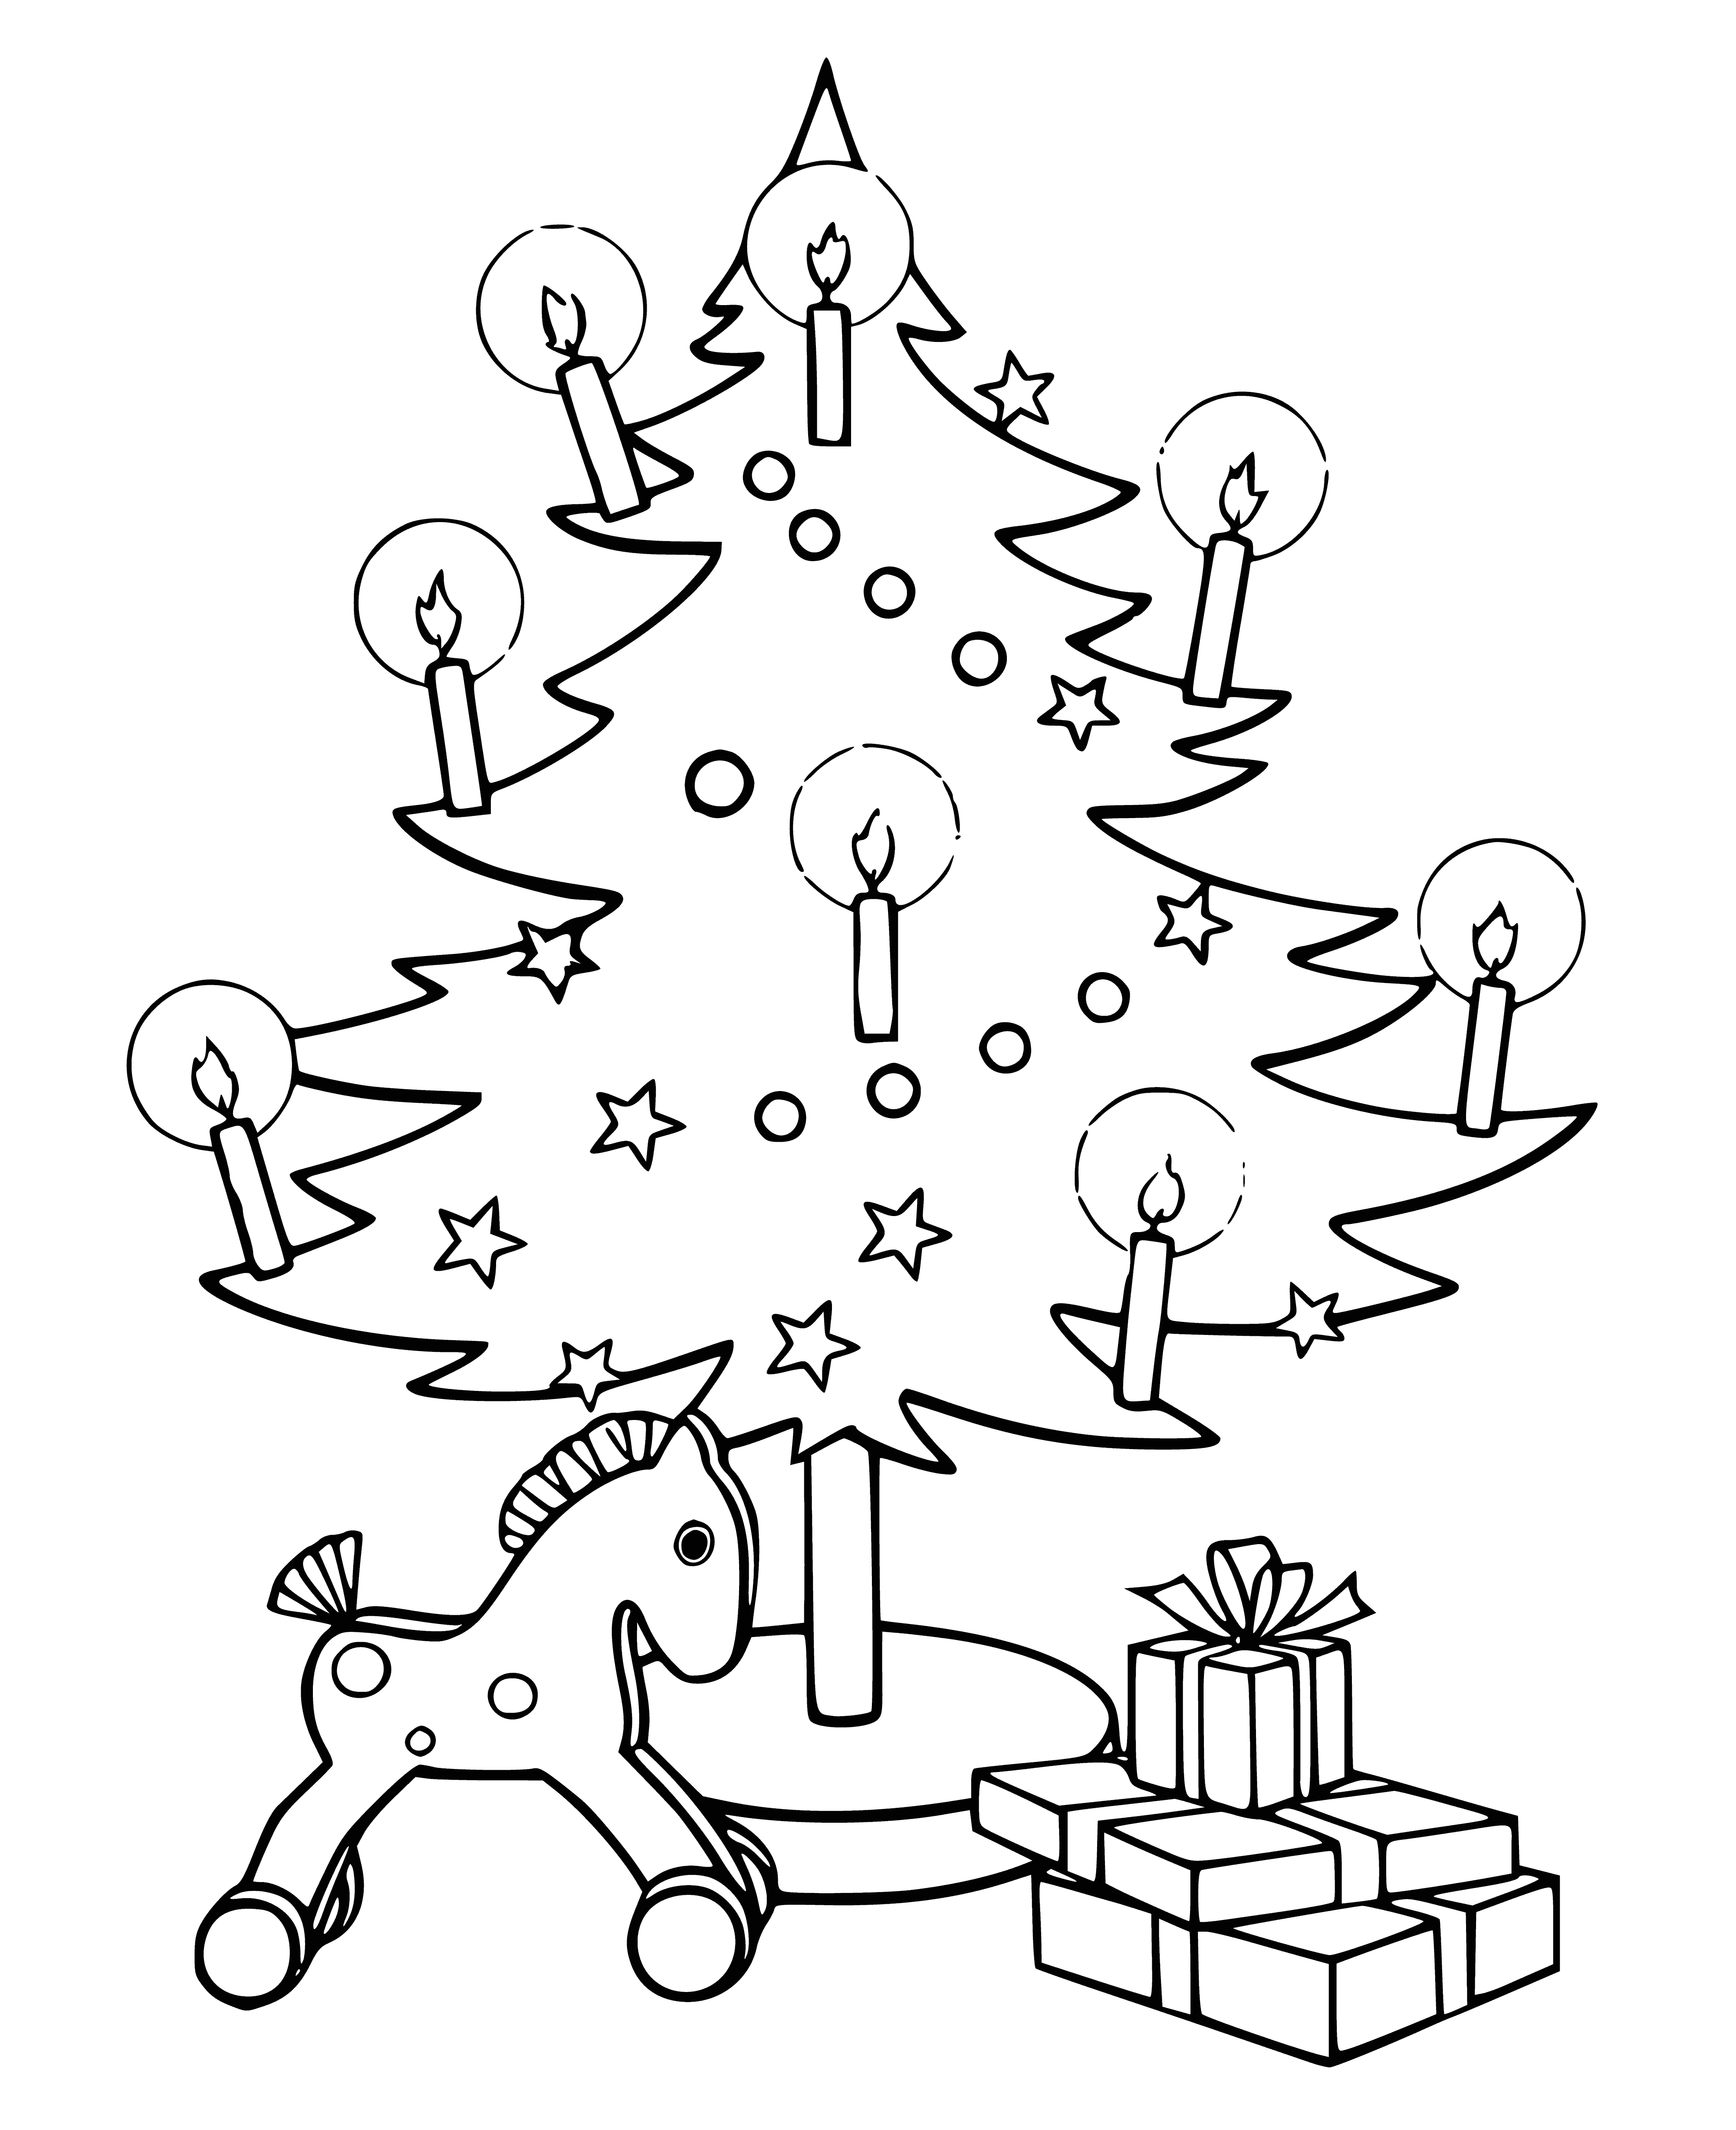 coloring page: Santa and his reindeer visiting the Christmas tree surrounded by presents and toys.